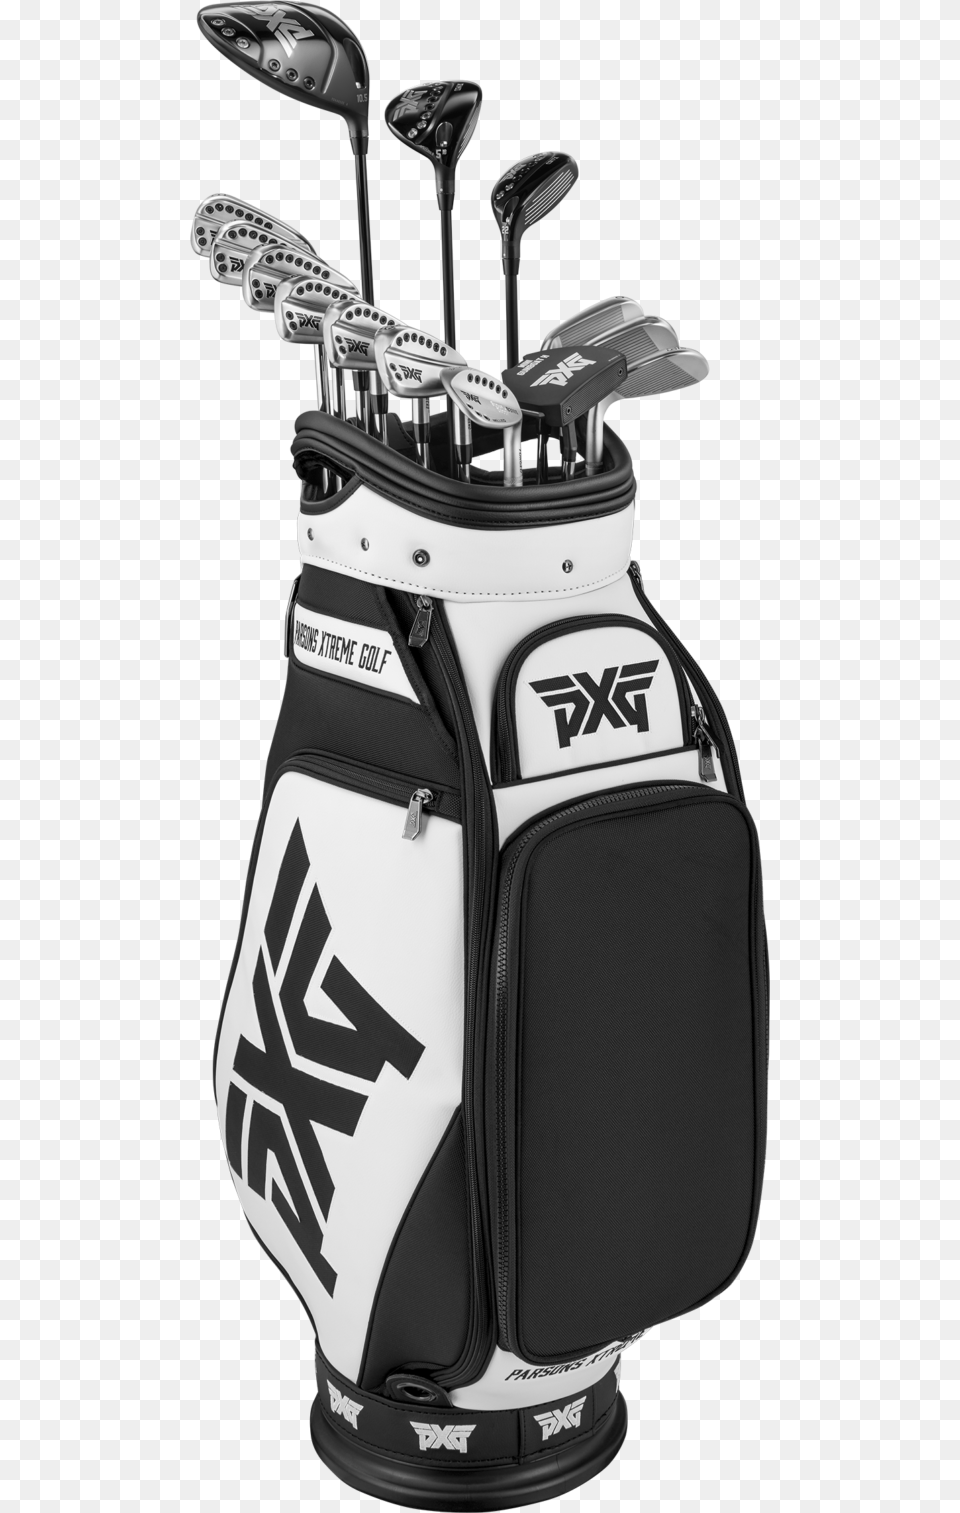 Pxg Gen2 Bag Of Clubs White2 Pxg, Golf, Golf Club, Sport Png Image